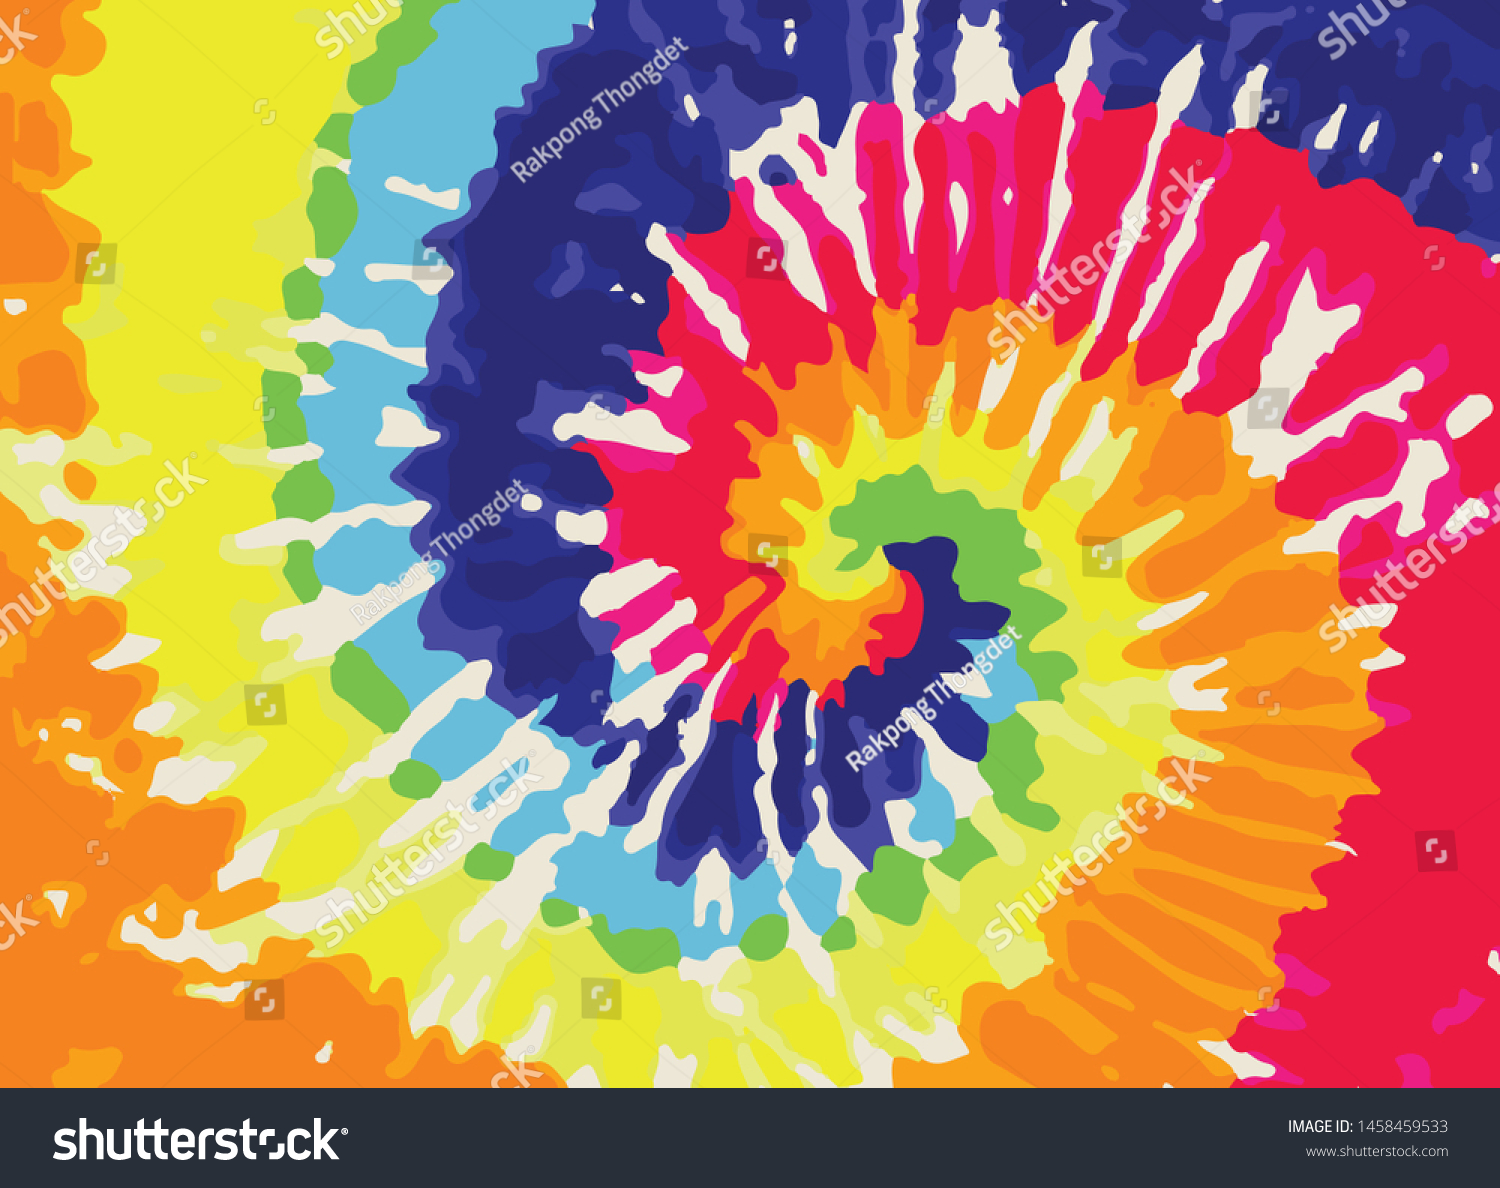 Colorful Tie Dye Pattern Background Stock Vector (Royalty Free ...